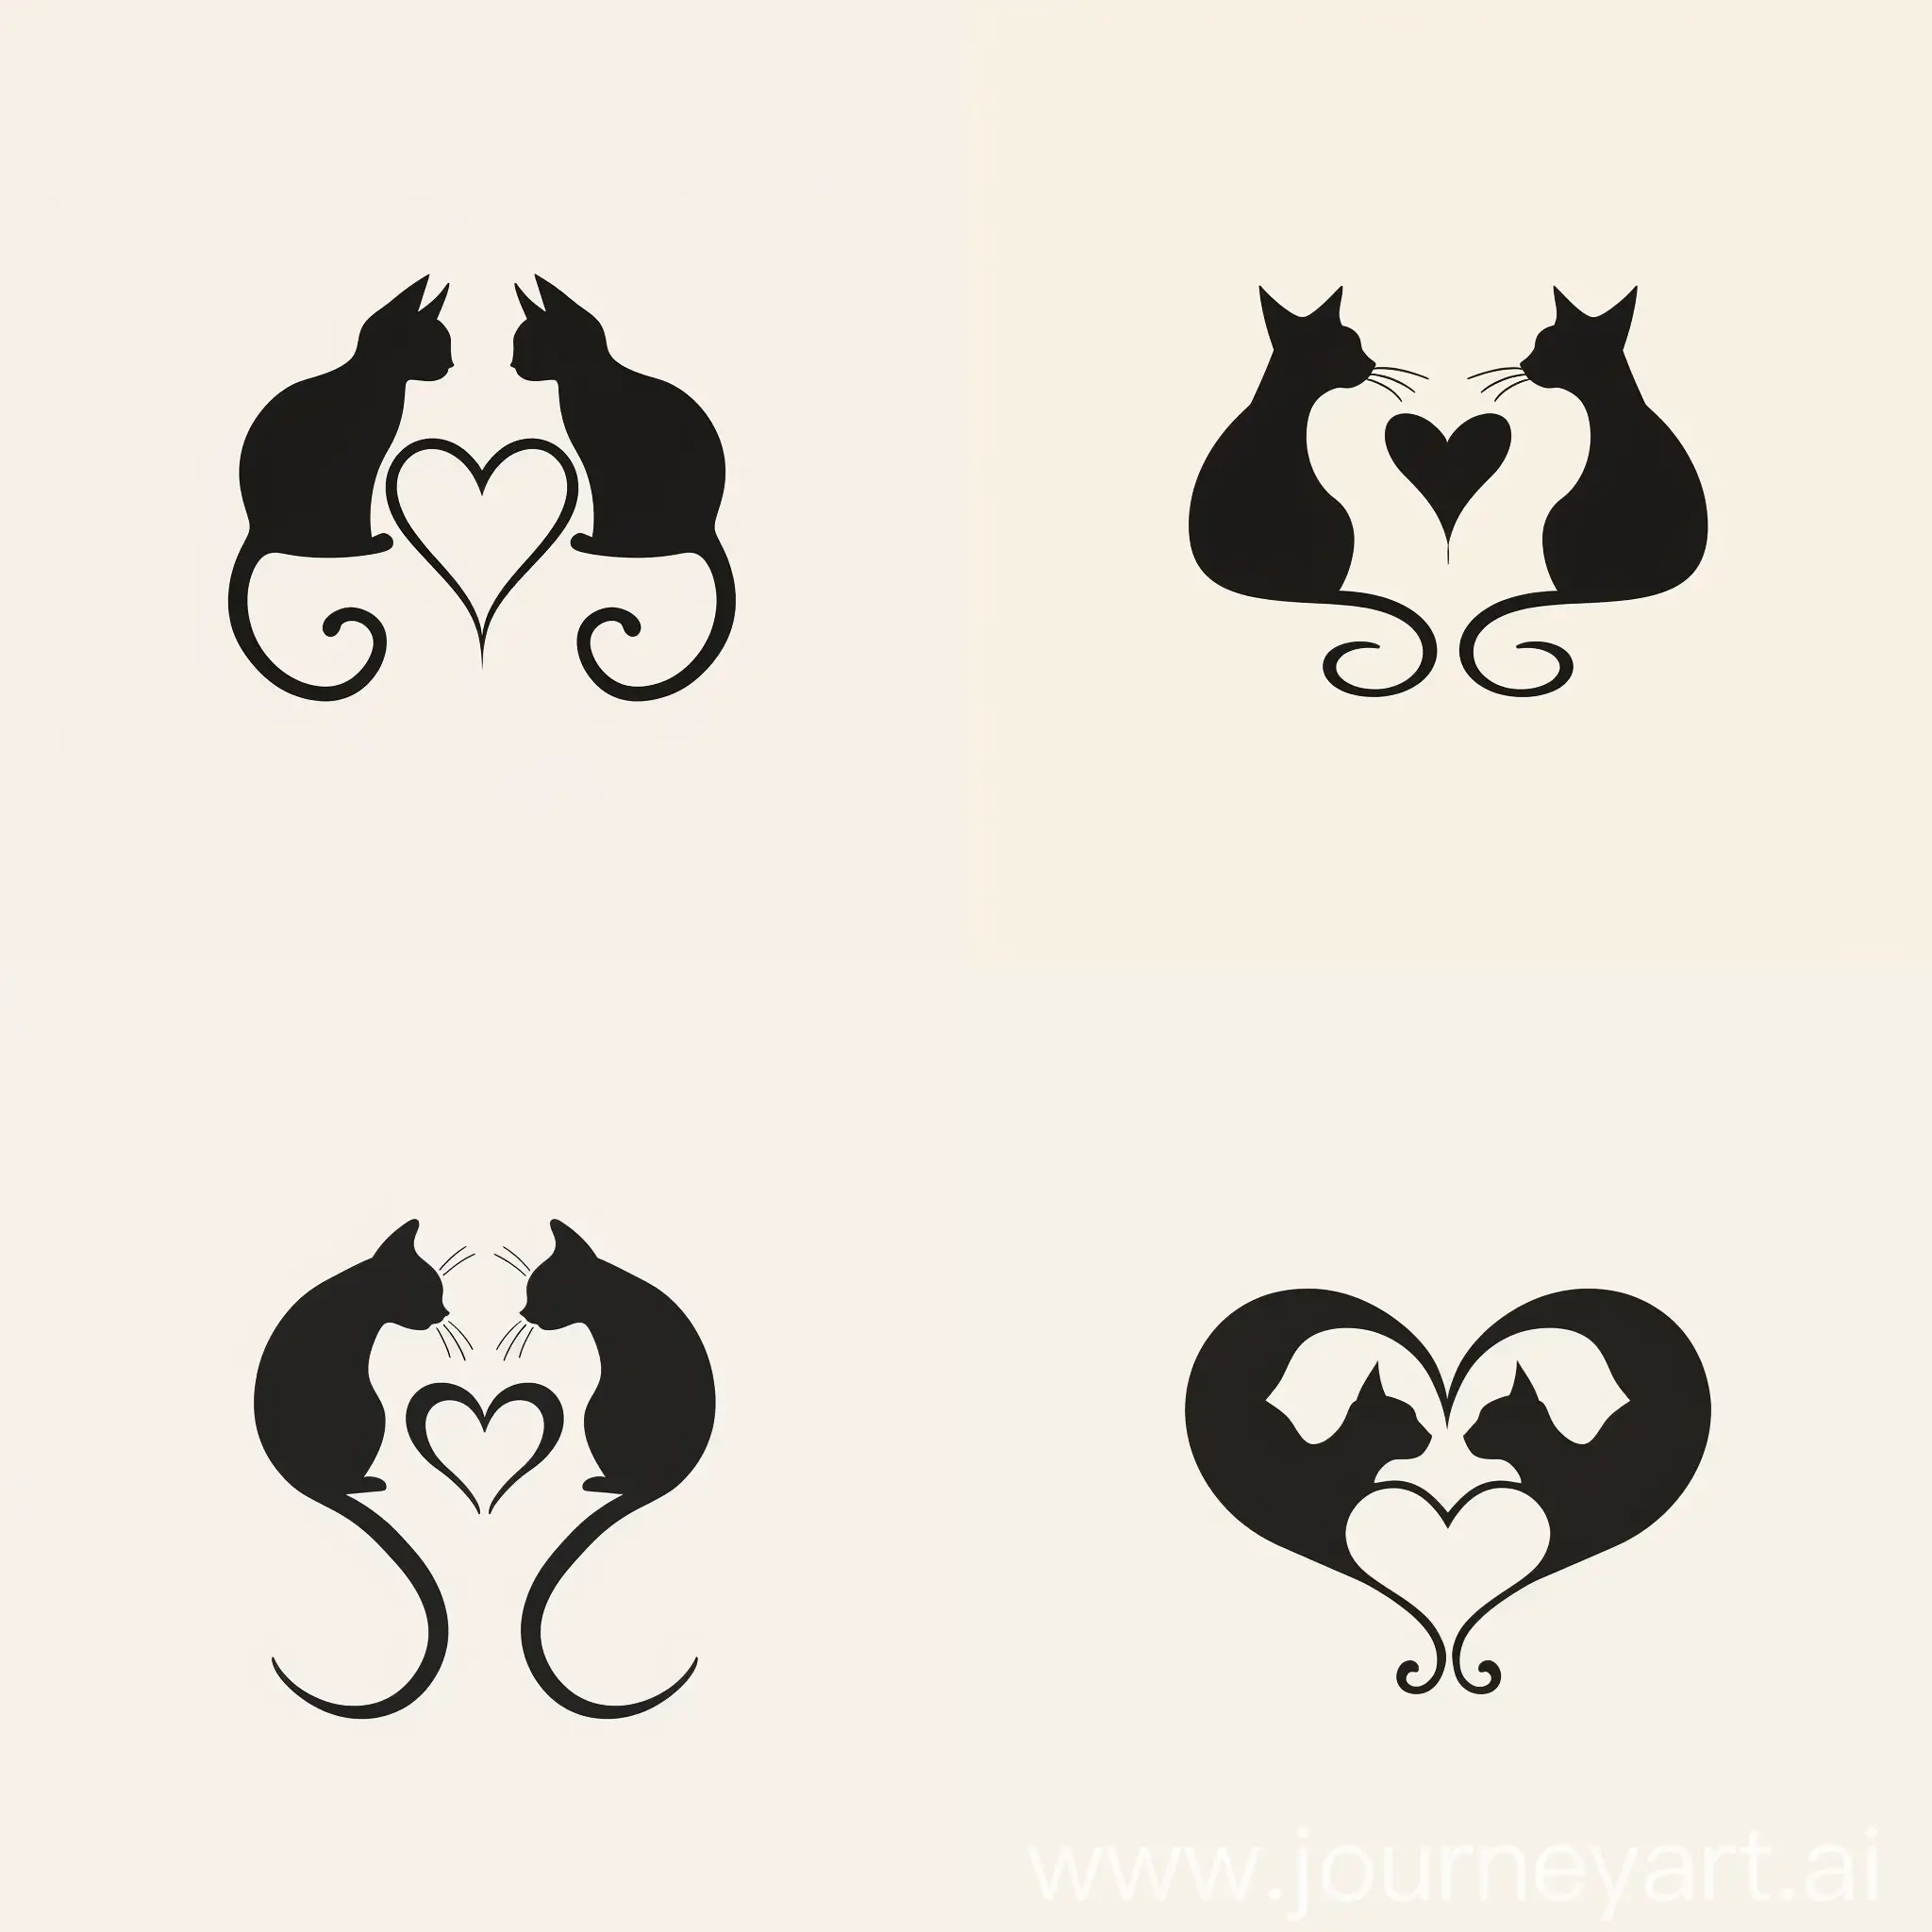 The logo for a minimalist café with cats features a simple and clean design. It includes two stylized cat silhouettes facing each other, with their tails forming a heart shape in the middle. The color scheme is black and white, adding to the sleek and modern look of the logo. The overall aesthetic is playful and charming, appealing to cat lovers and coffee enthusiasts alike.